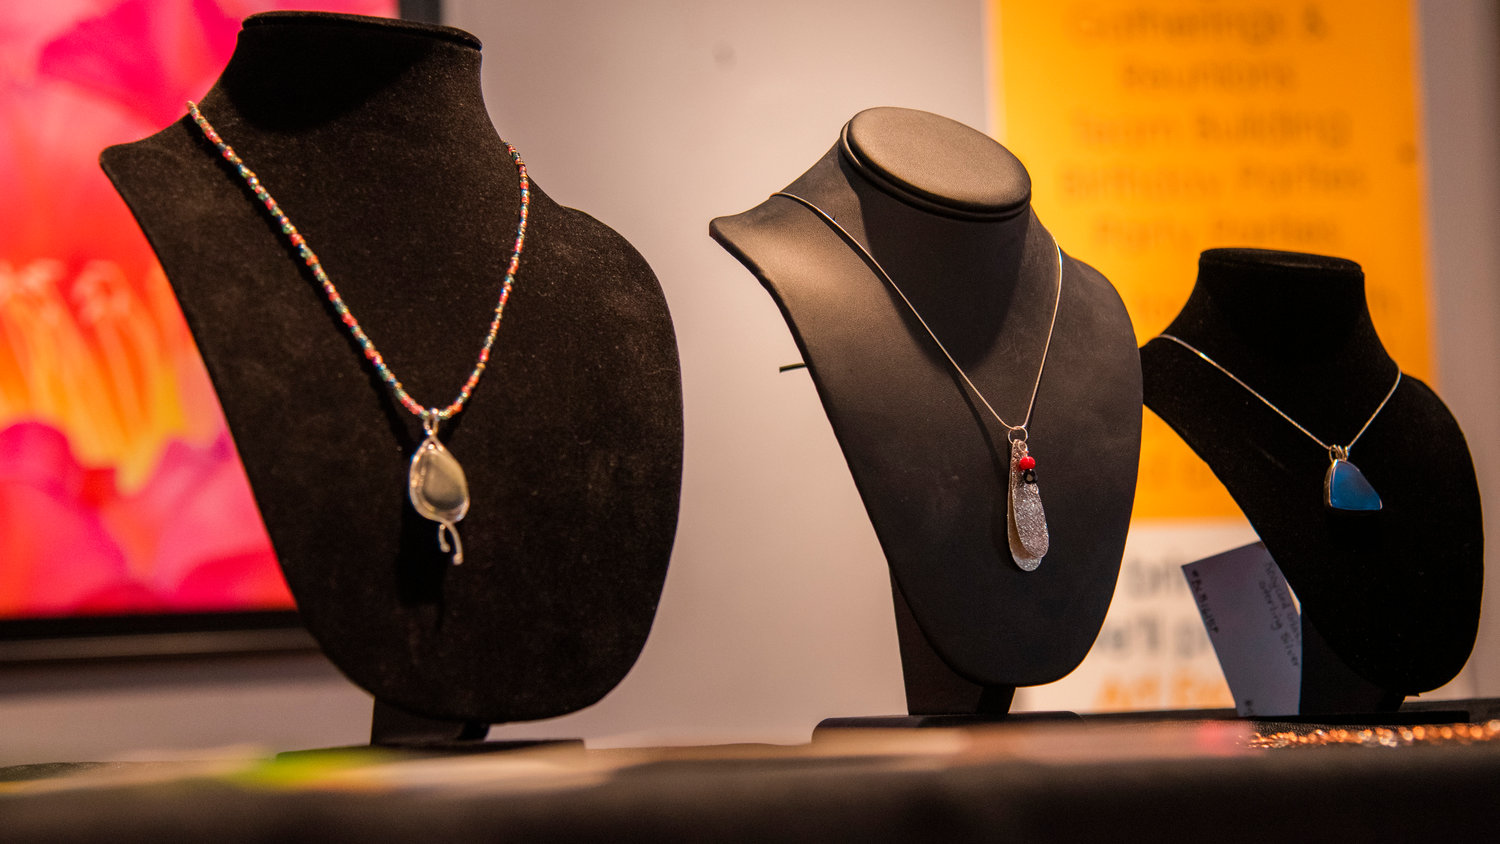 Hand crafted jewlery made with sterling silver sits on display inside the Rectangle Gallery in Centralia during an ARTrails Studio Tour Saturday afternoon.